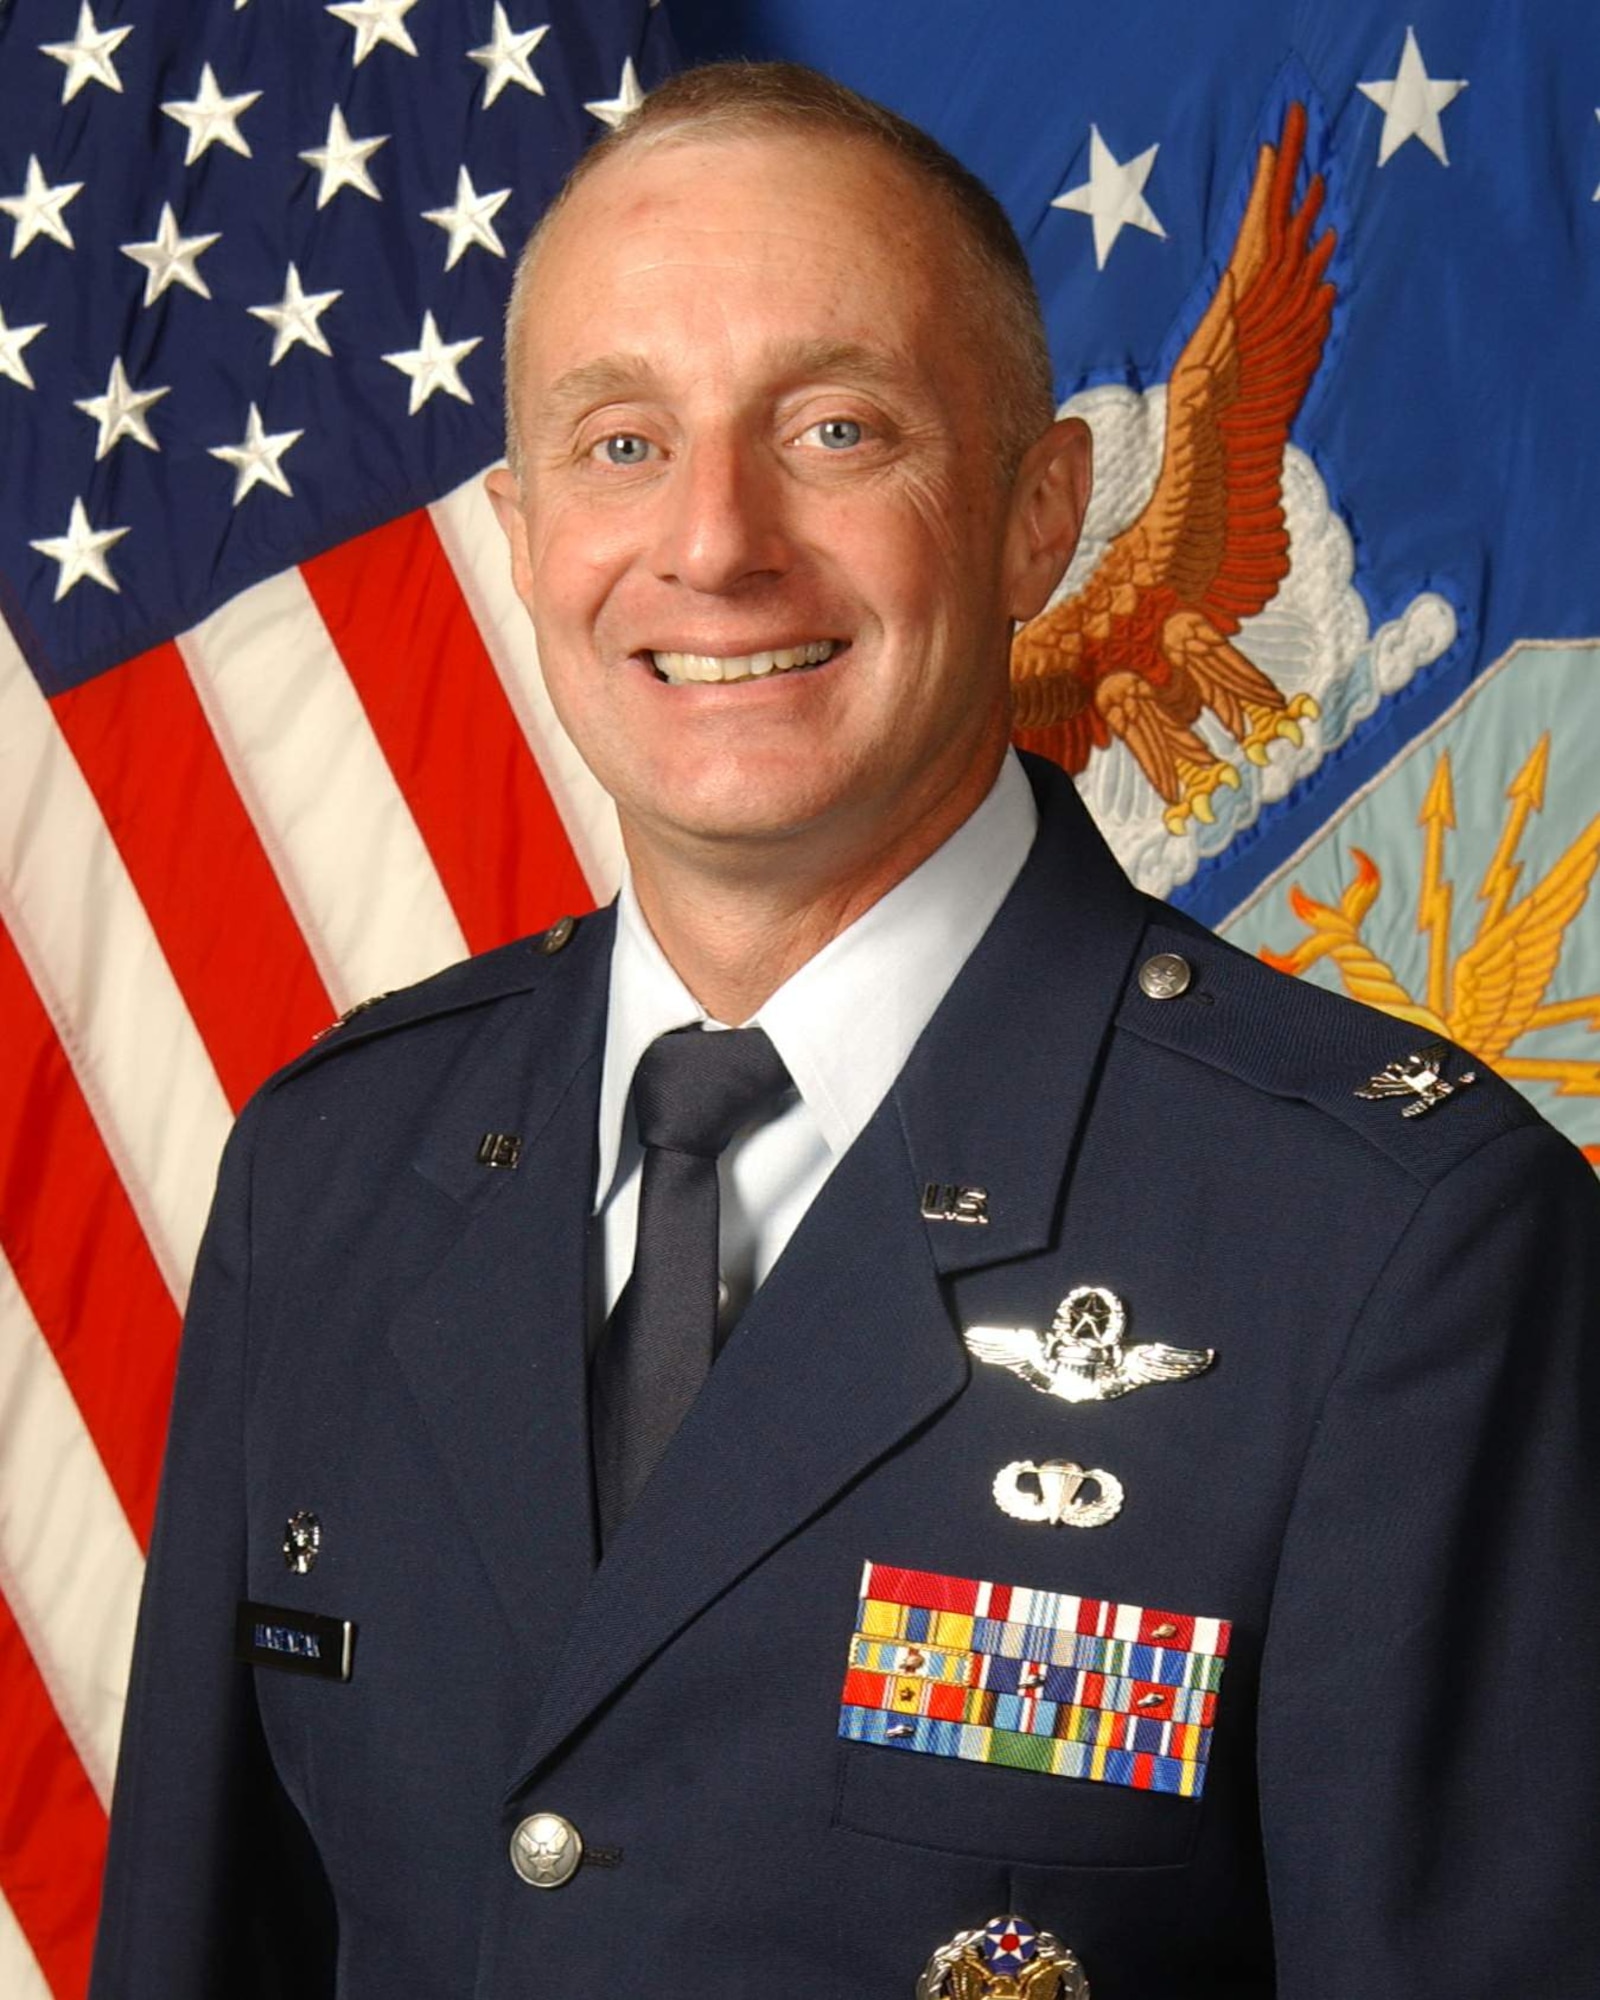 Col. Garrett Harencak is the current 509th Bomb Wing commander. (U.S. Air Force photo)